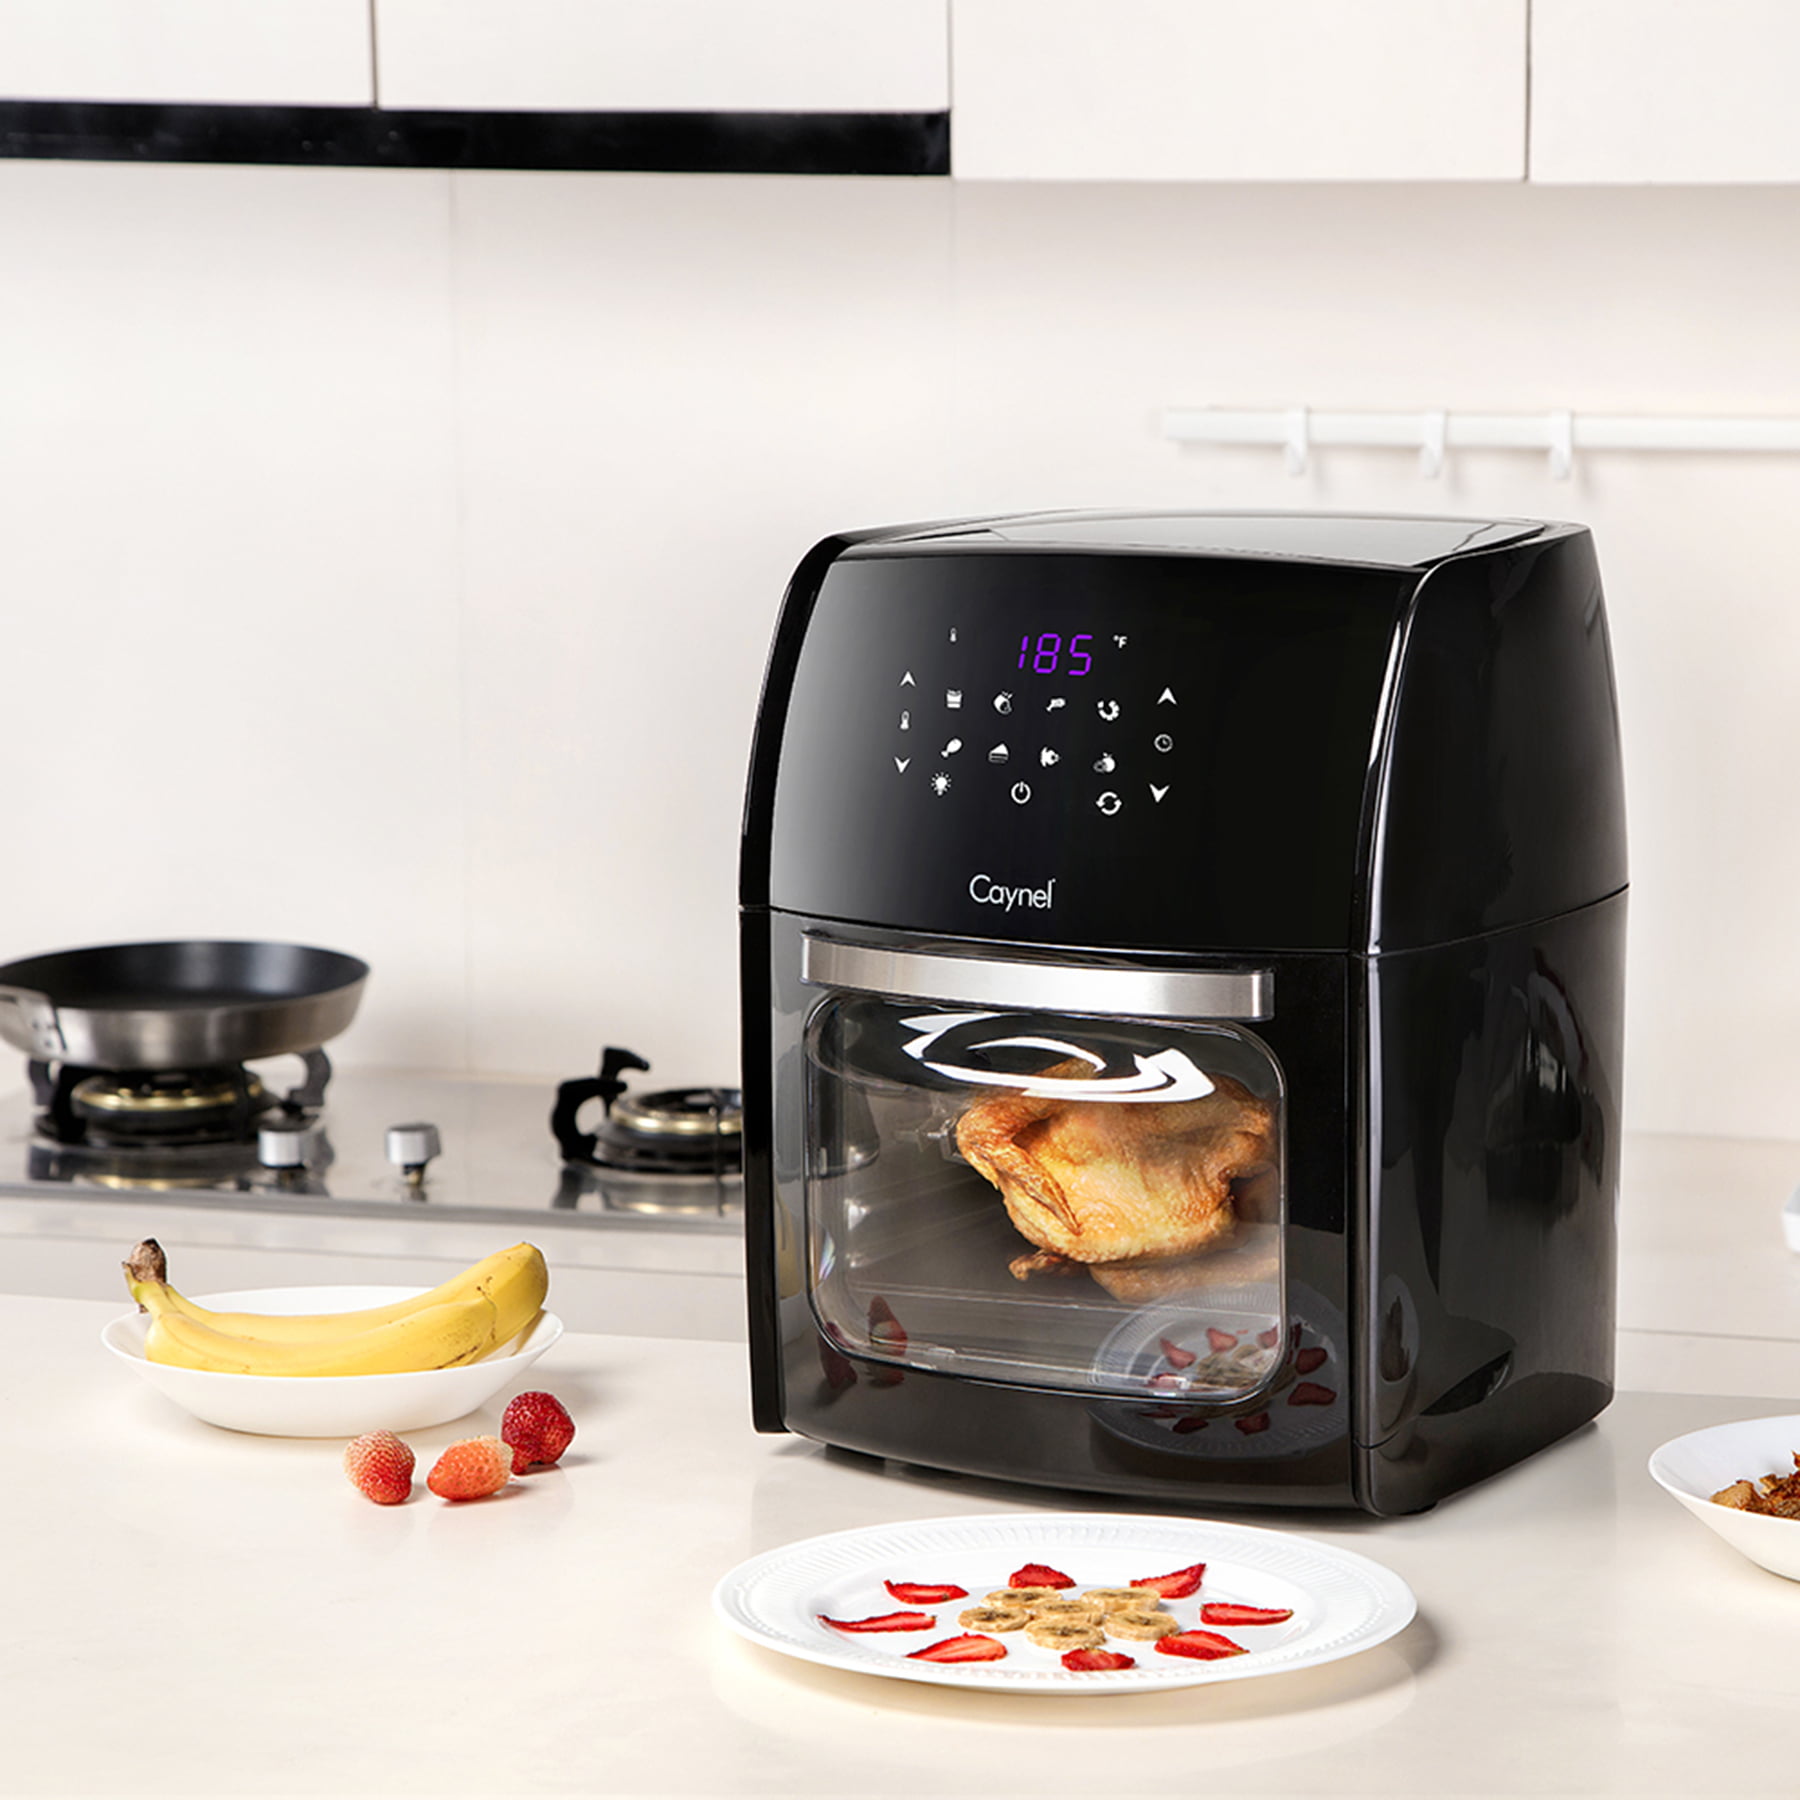 CAYNEL Air Fryer Oven Oil Free Nonstick Cooker 